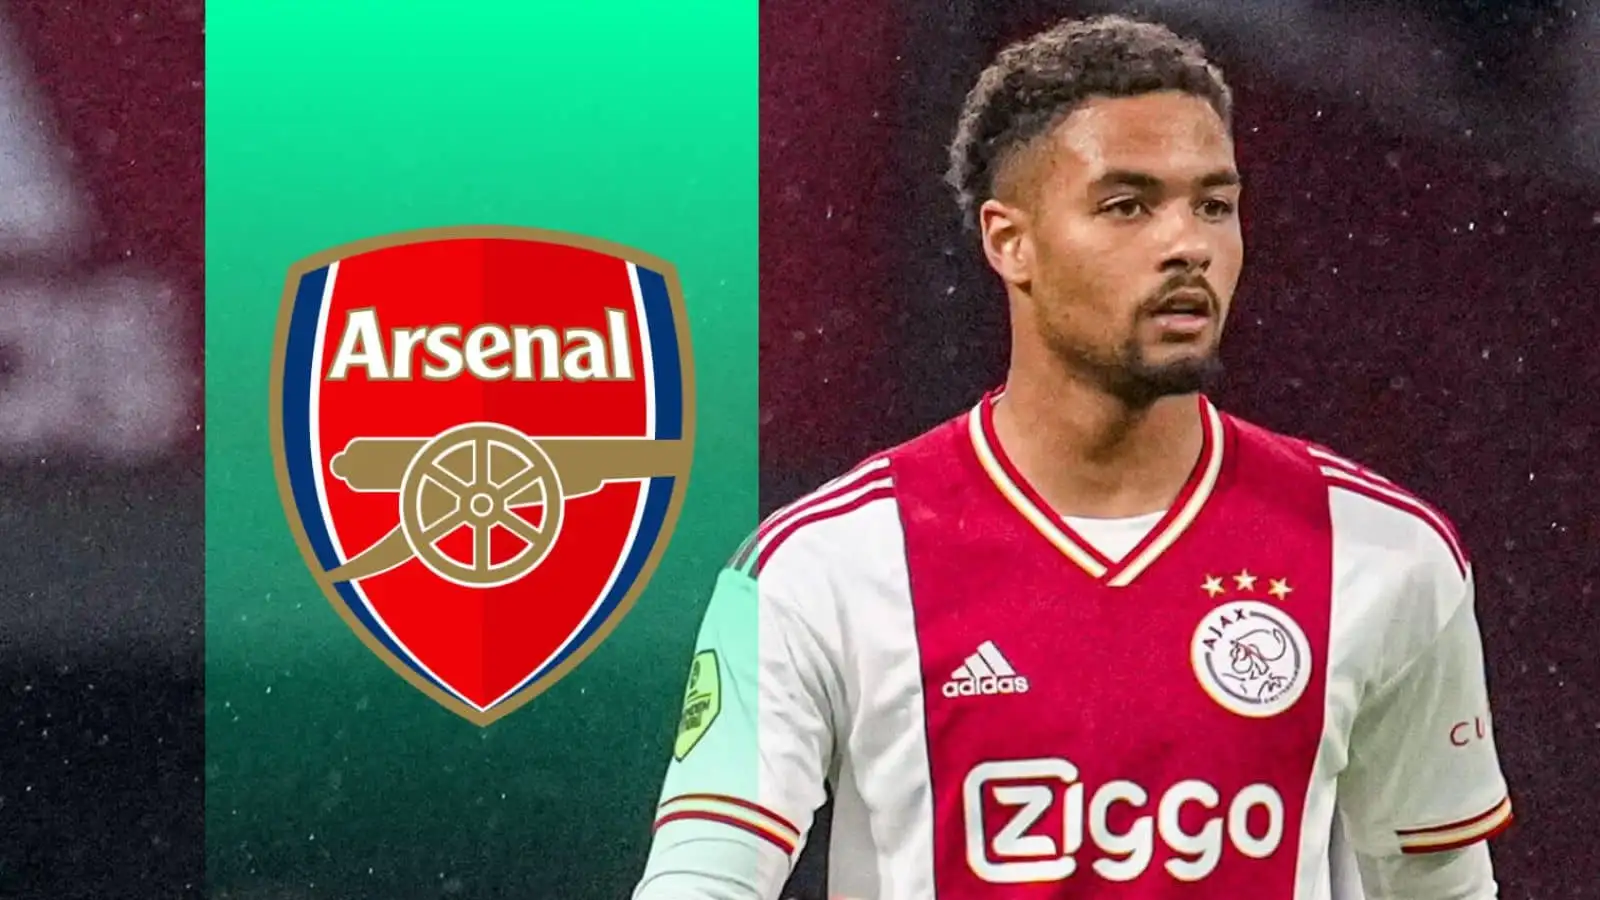 Devyne Rensch of Ajax is wanted by Arsenal